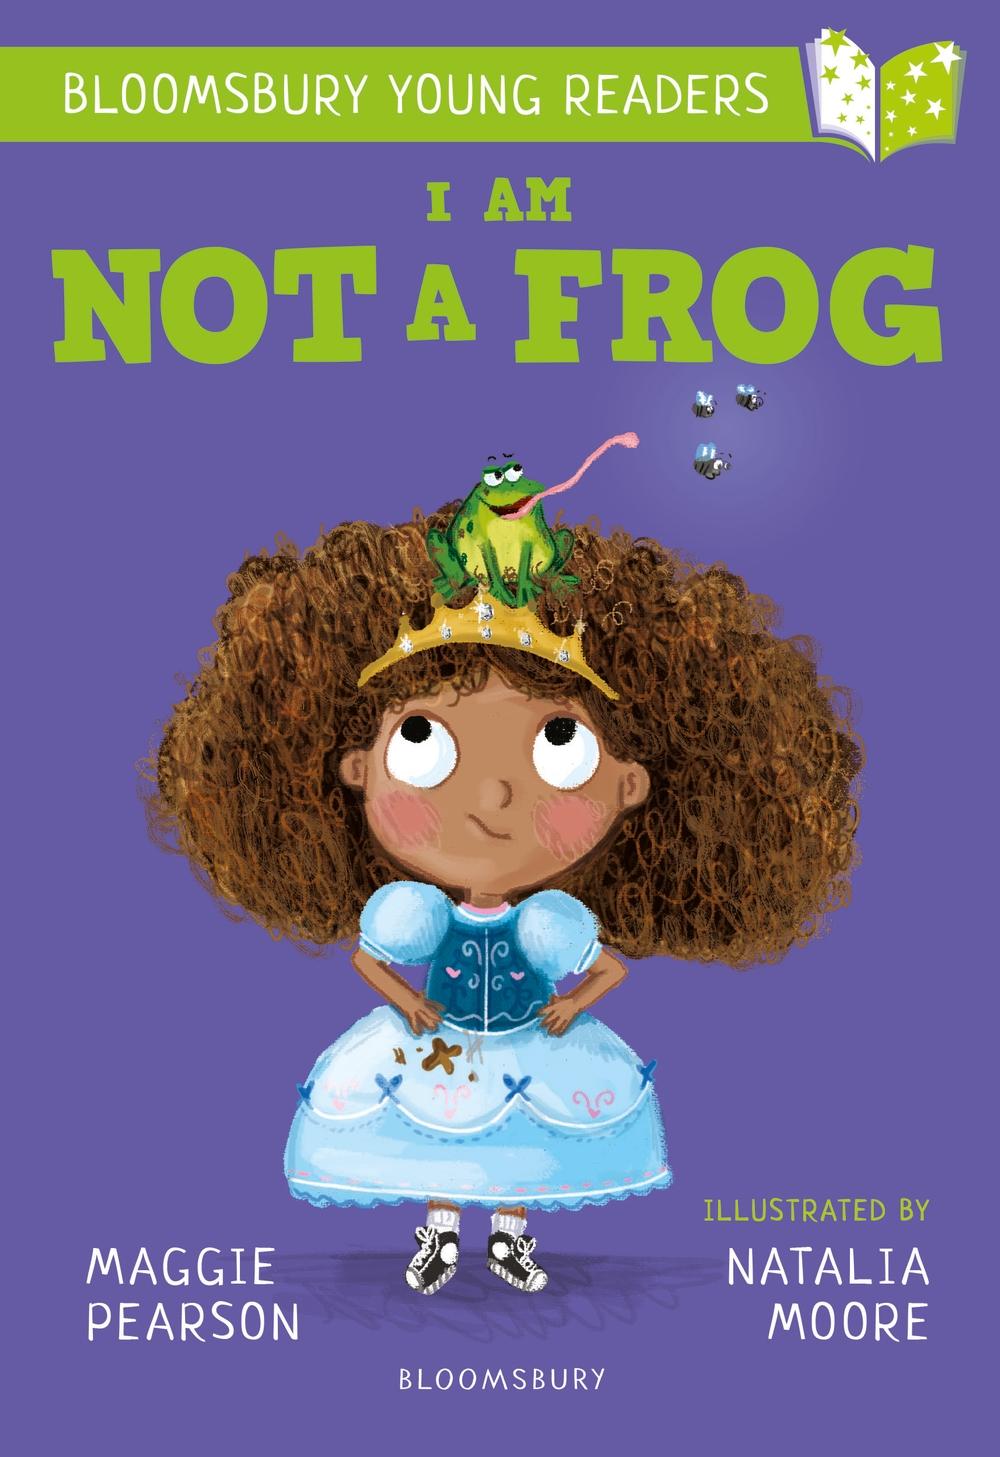 I Am Not A Frog: A Bloomsbury Young Reader - Maggie Pearson